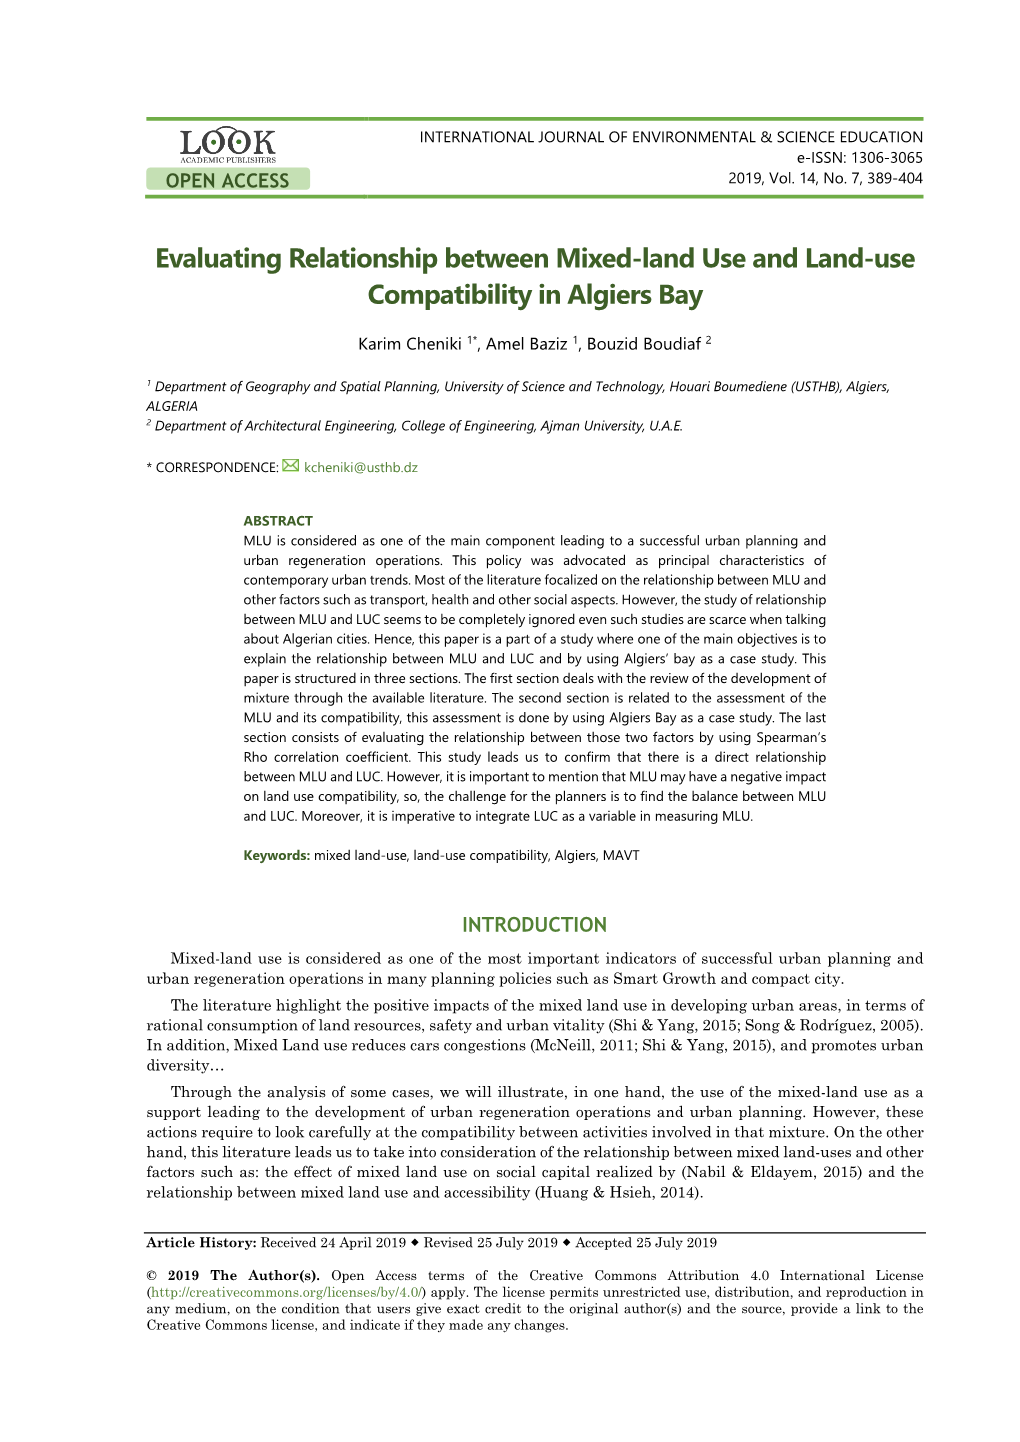 Evaluating Relationship Between Mixed-Land Use and Land-Use Compatibility in Algiers Bay